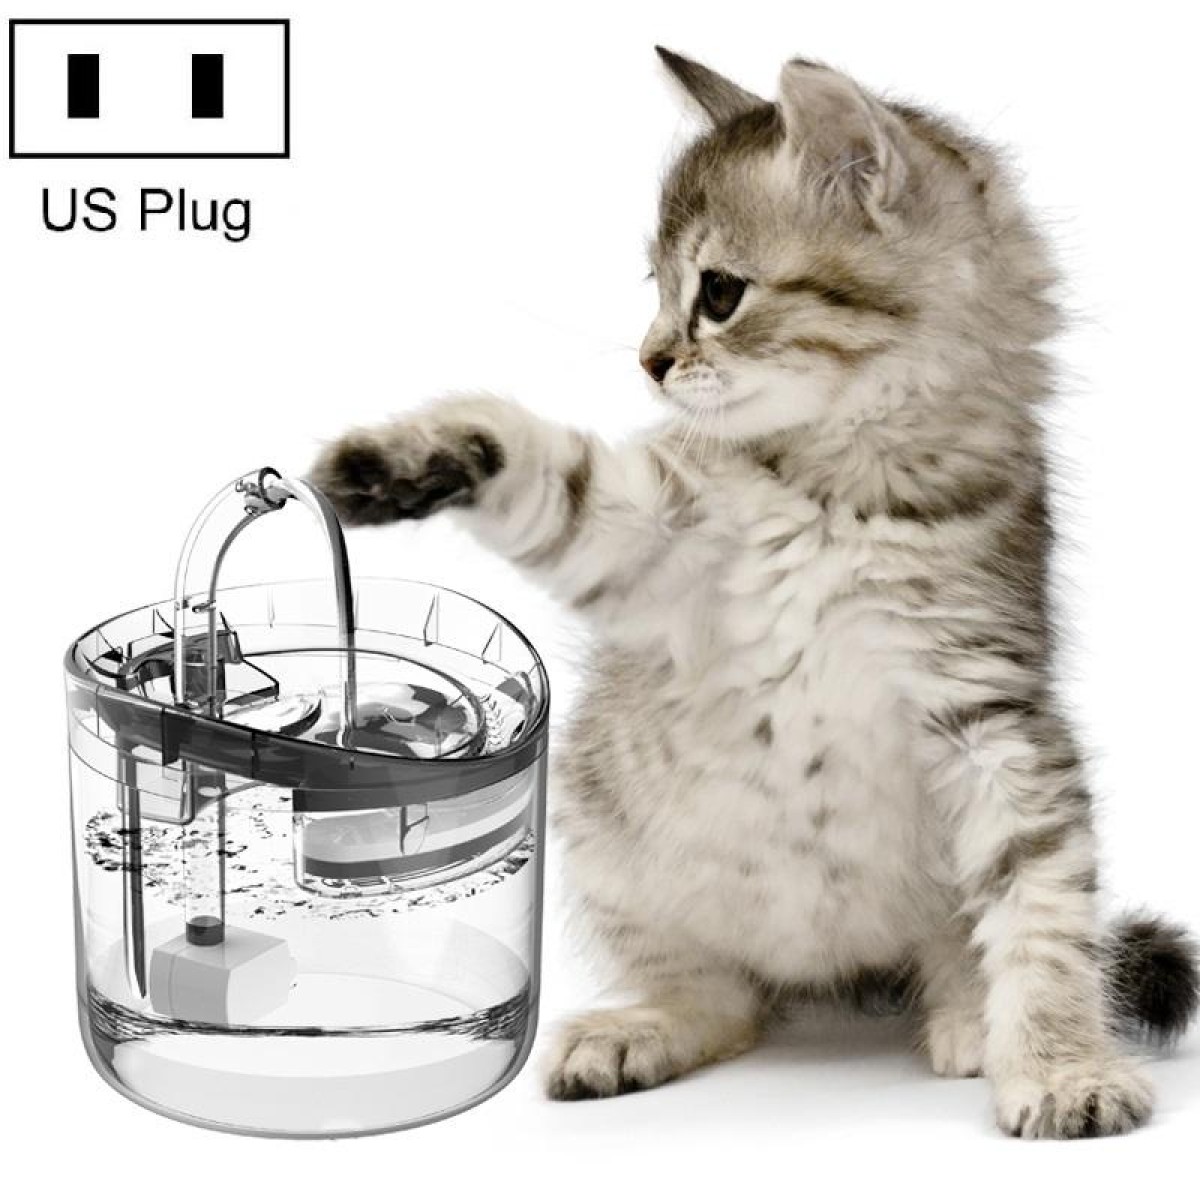 Pet Automatic Circulating Silent And Does Not Leak Electricity Water Dispenser, Specification: US Plug, Style:Transparent Color